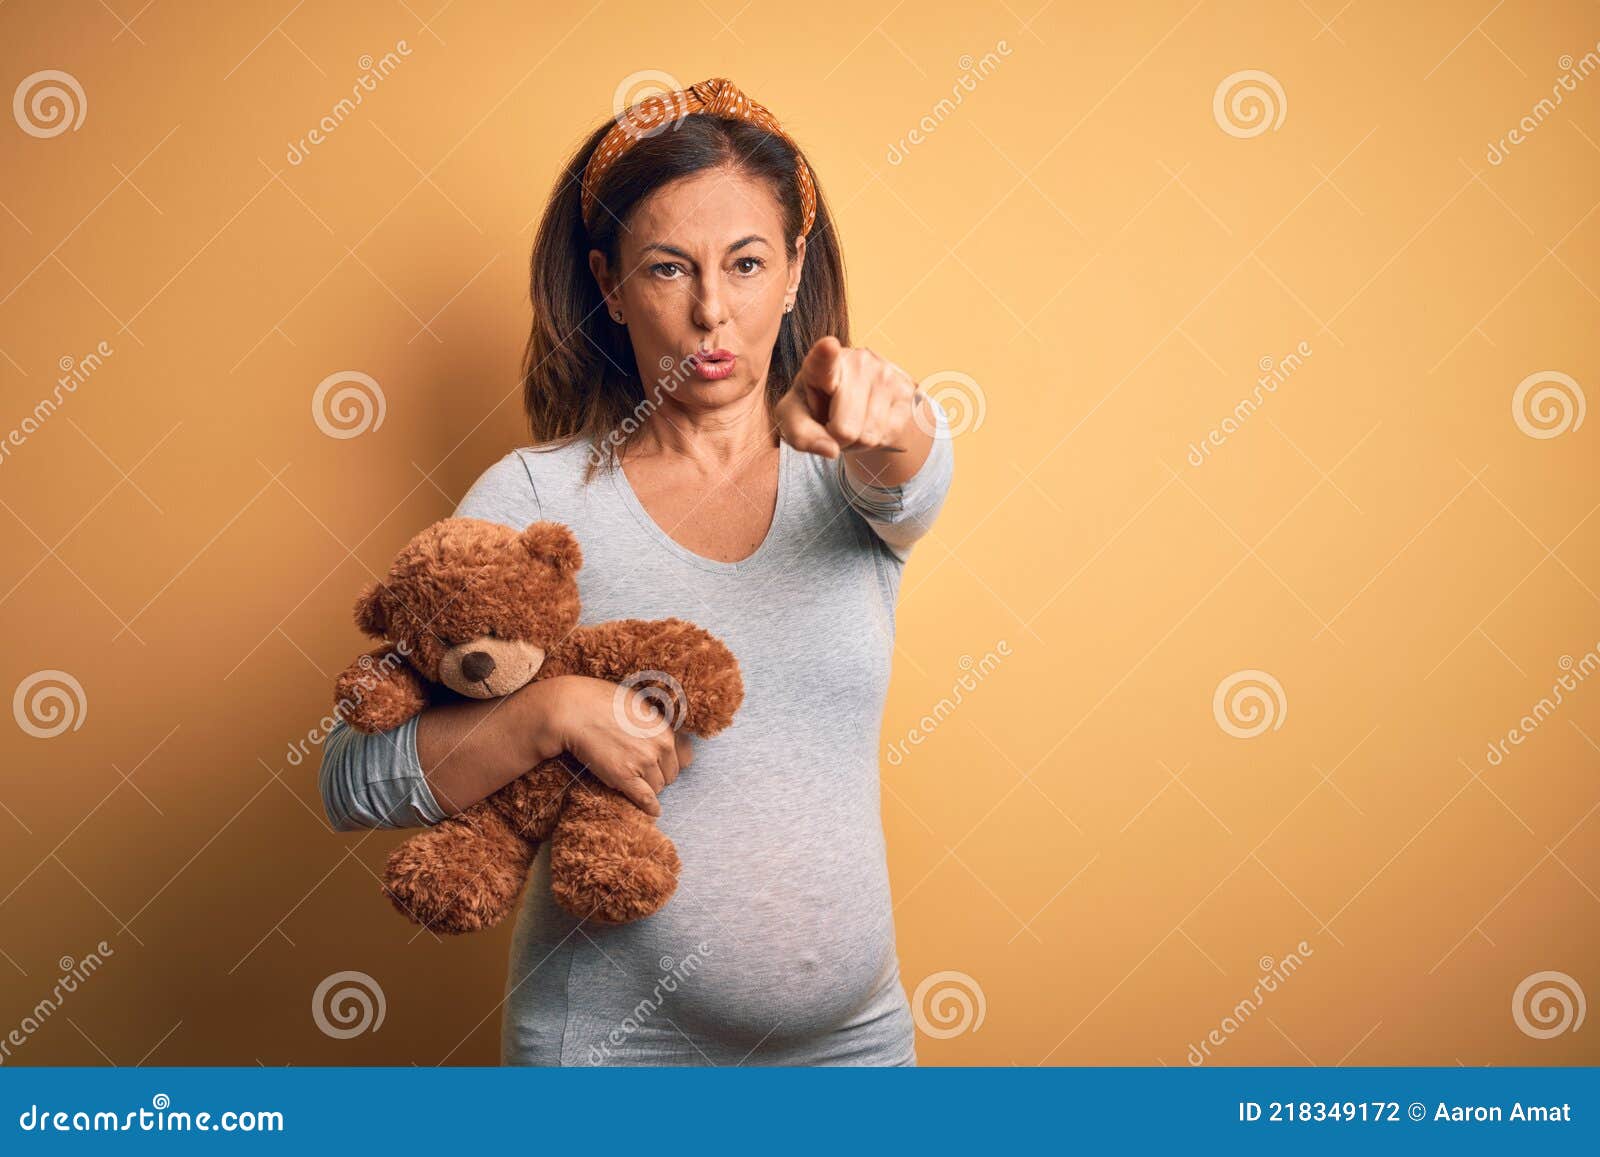 Middle Age Pregnant Woman Expecting Baby Holding Teddy Bear Stuffed Animal  Pointing with Finger To the Camera and To You, Hand Stock Photo - Image of  stuffed, expecting: 218349172